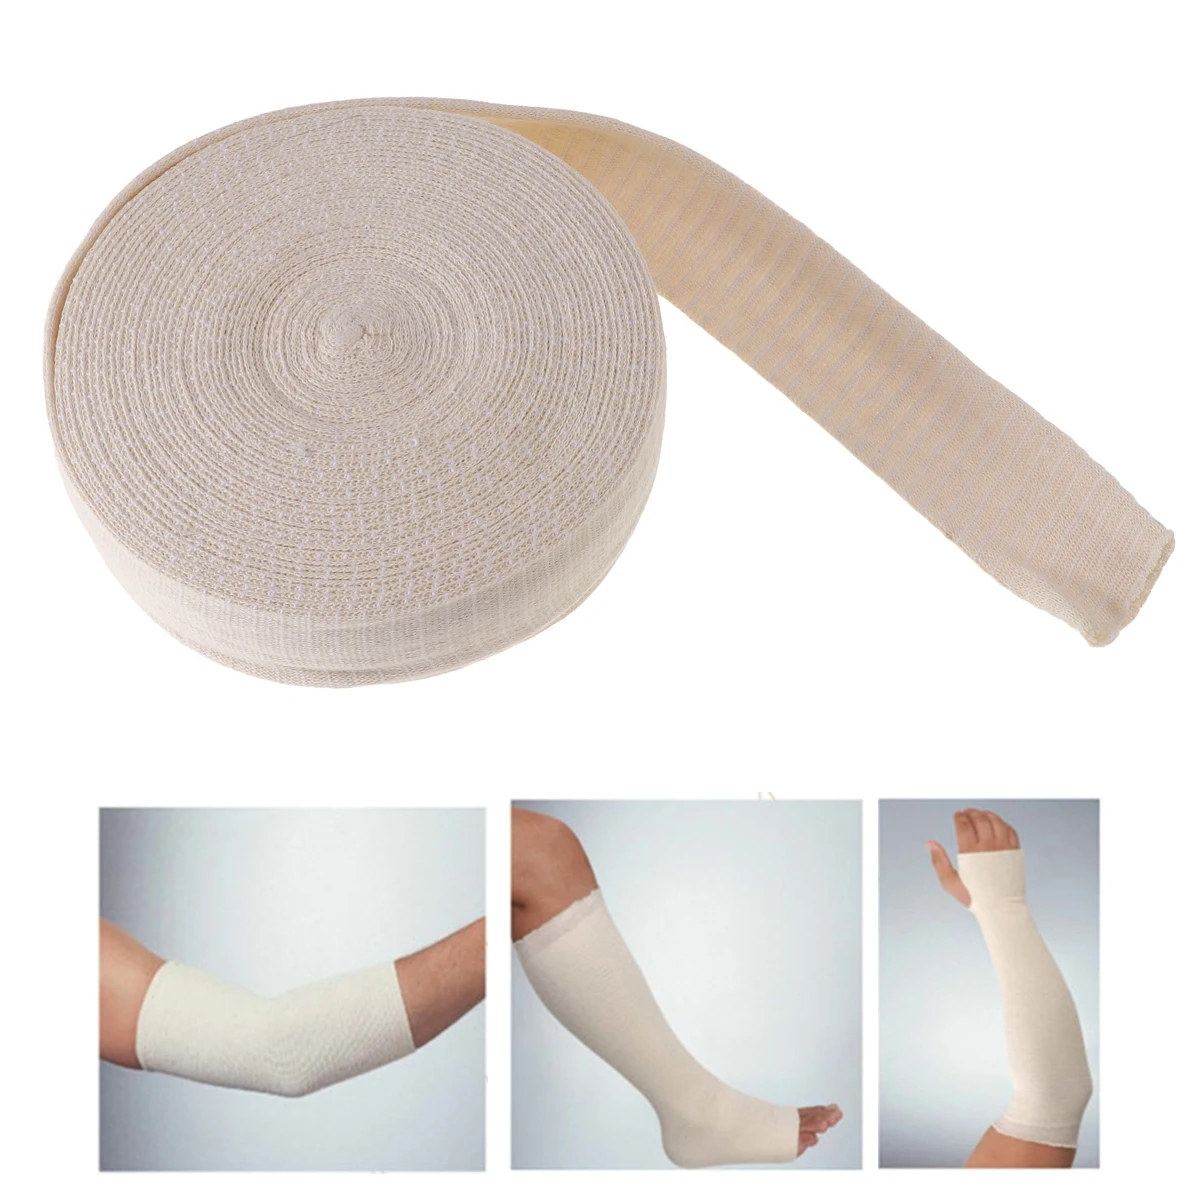 10m Tubular High Stretch Bandage Roll Medical Cotton Cover Plaster Liner First Aid Elastic Tube Socks Wrist Knee Wound Dressing